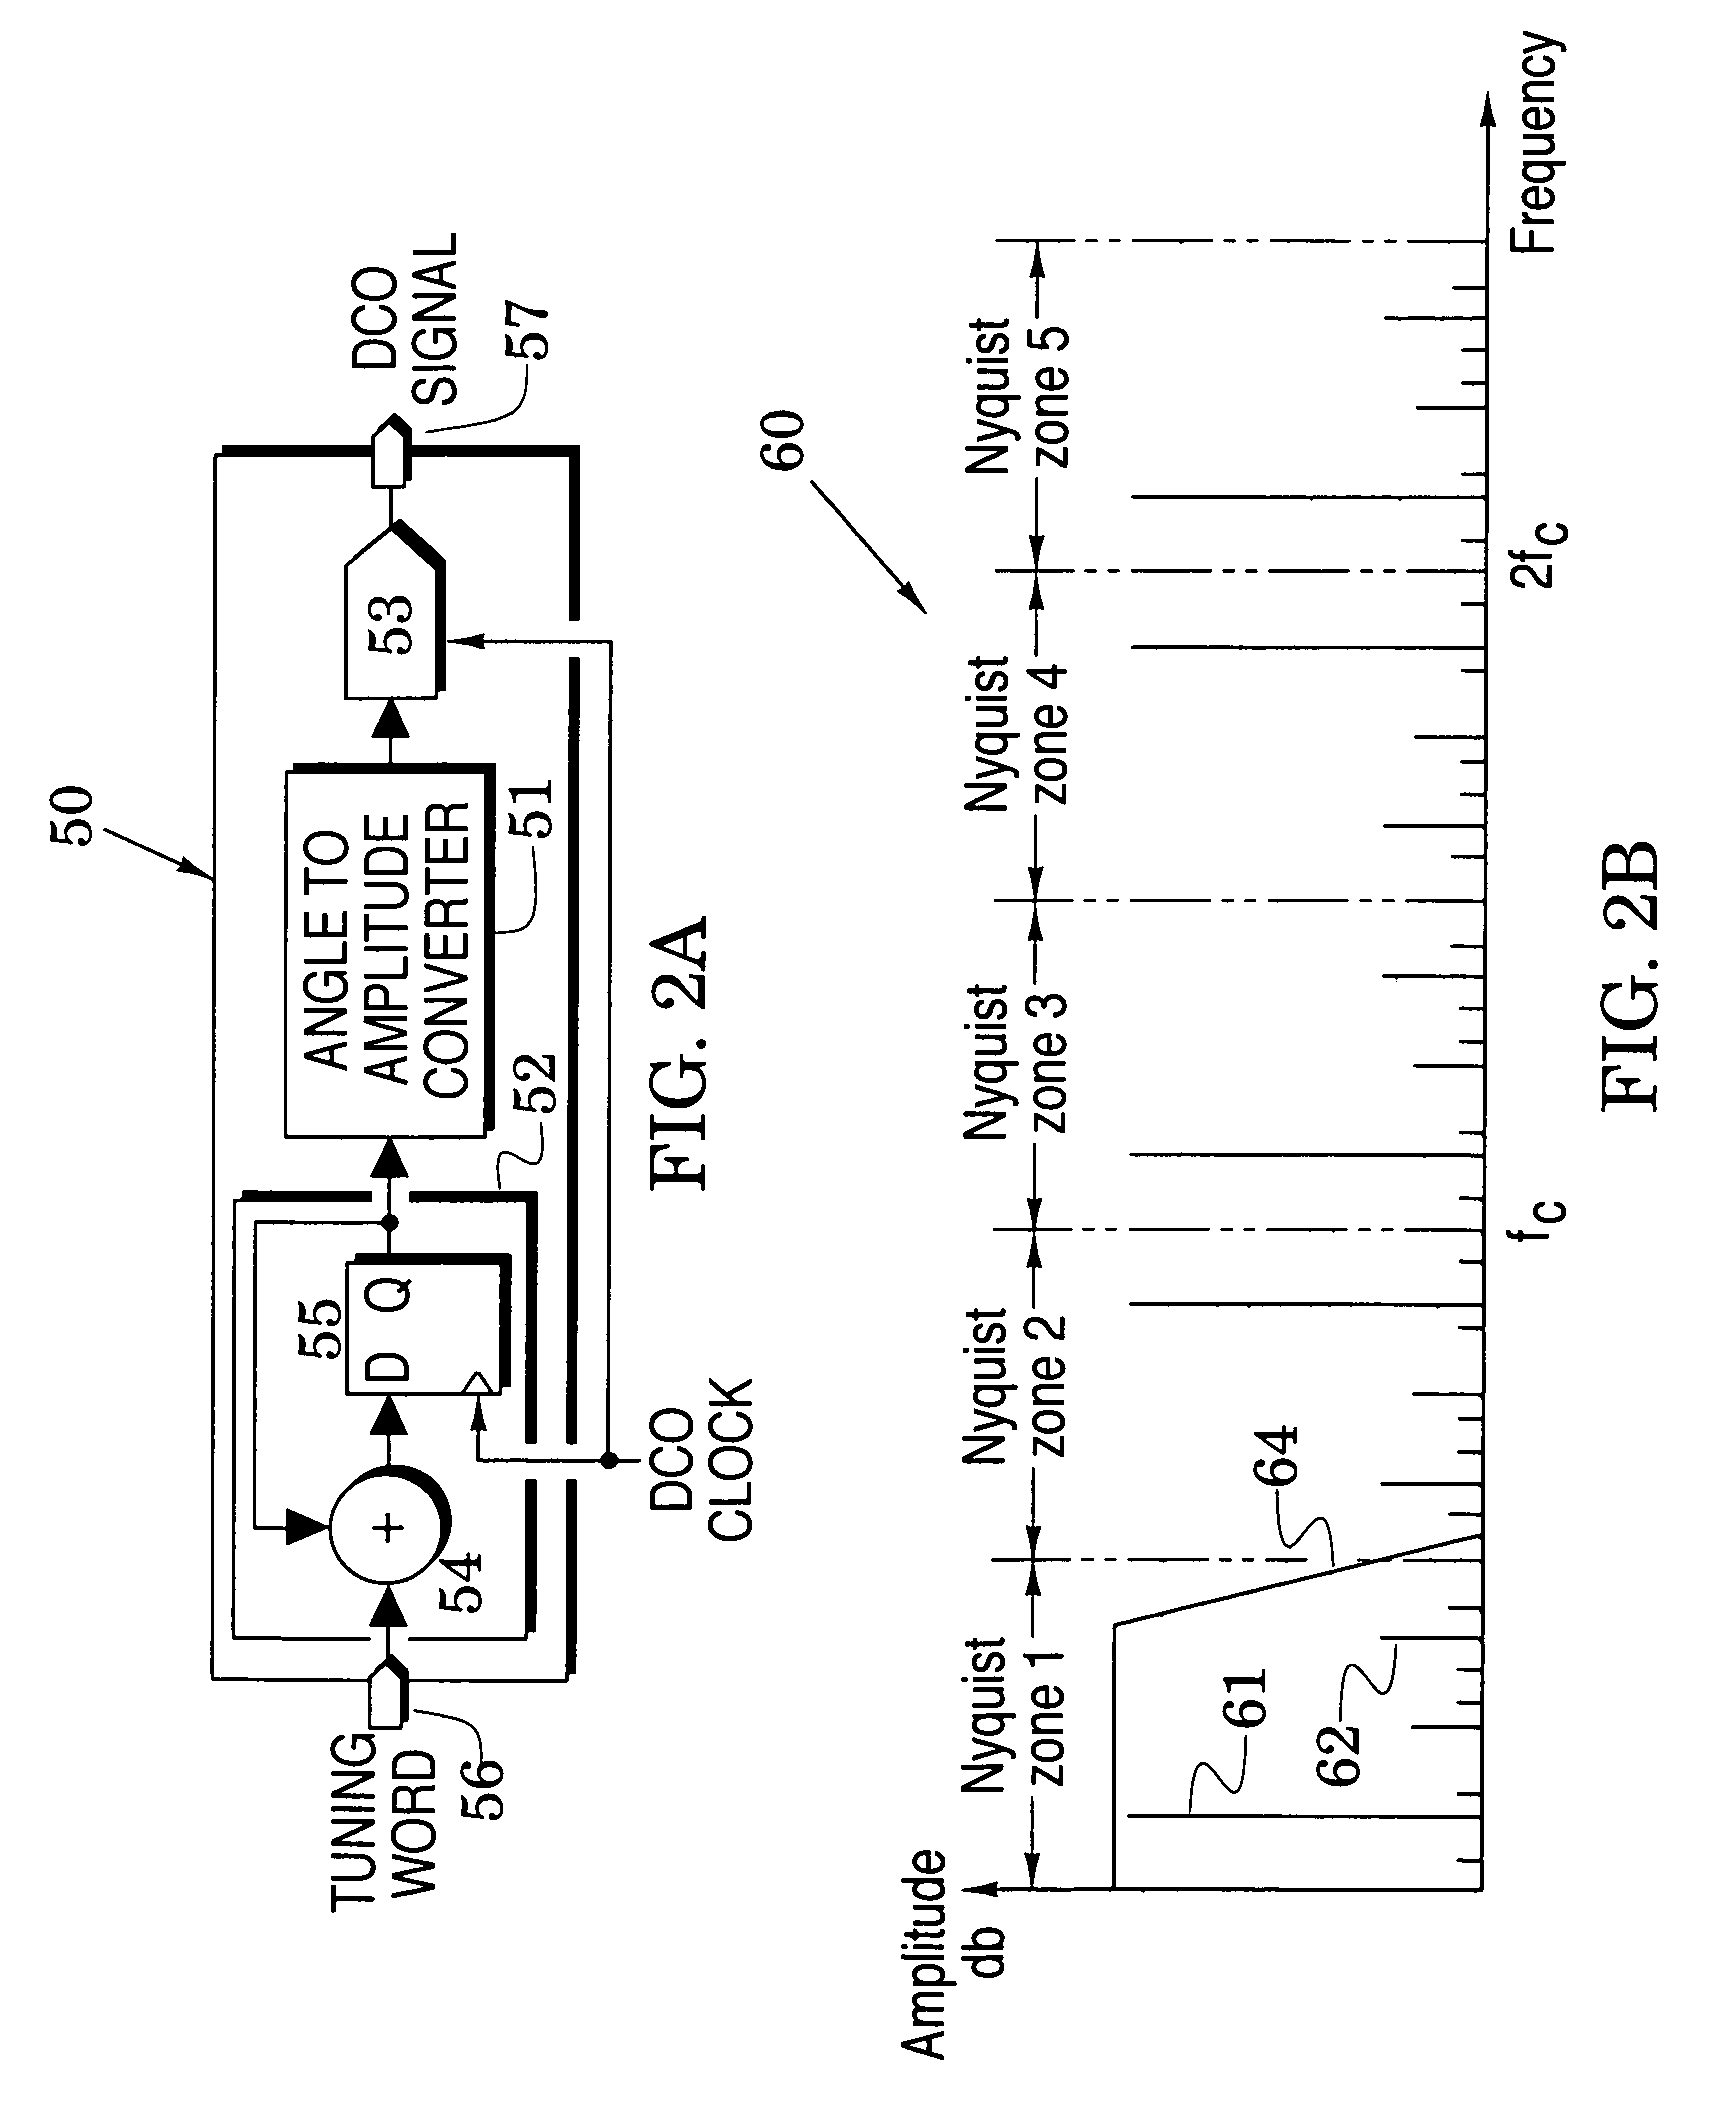 Frequency synthesizers for wireless communication systems